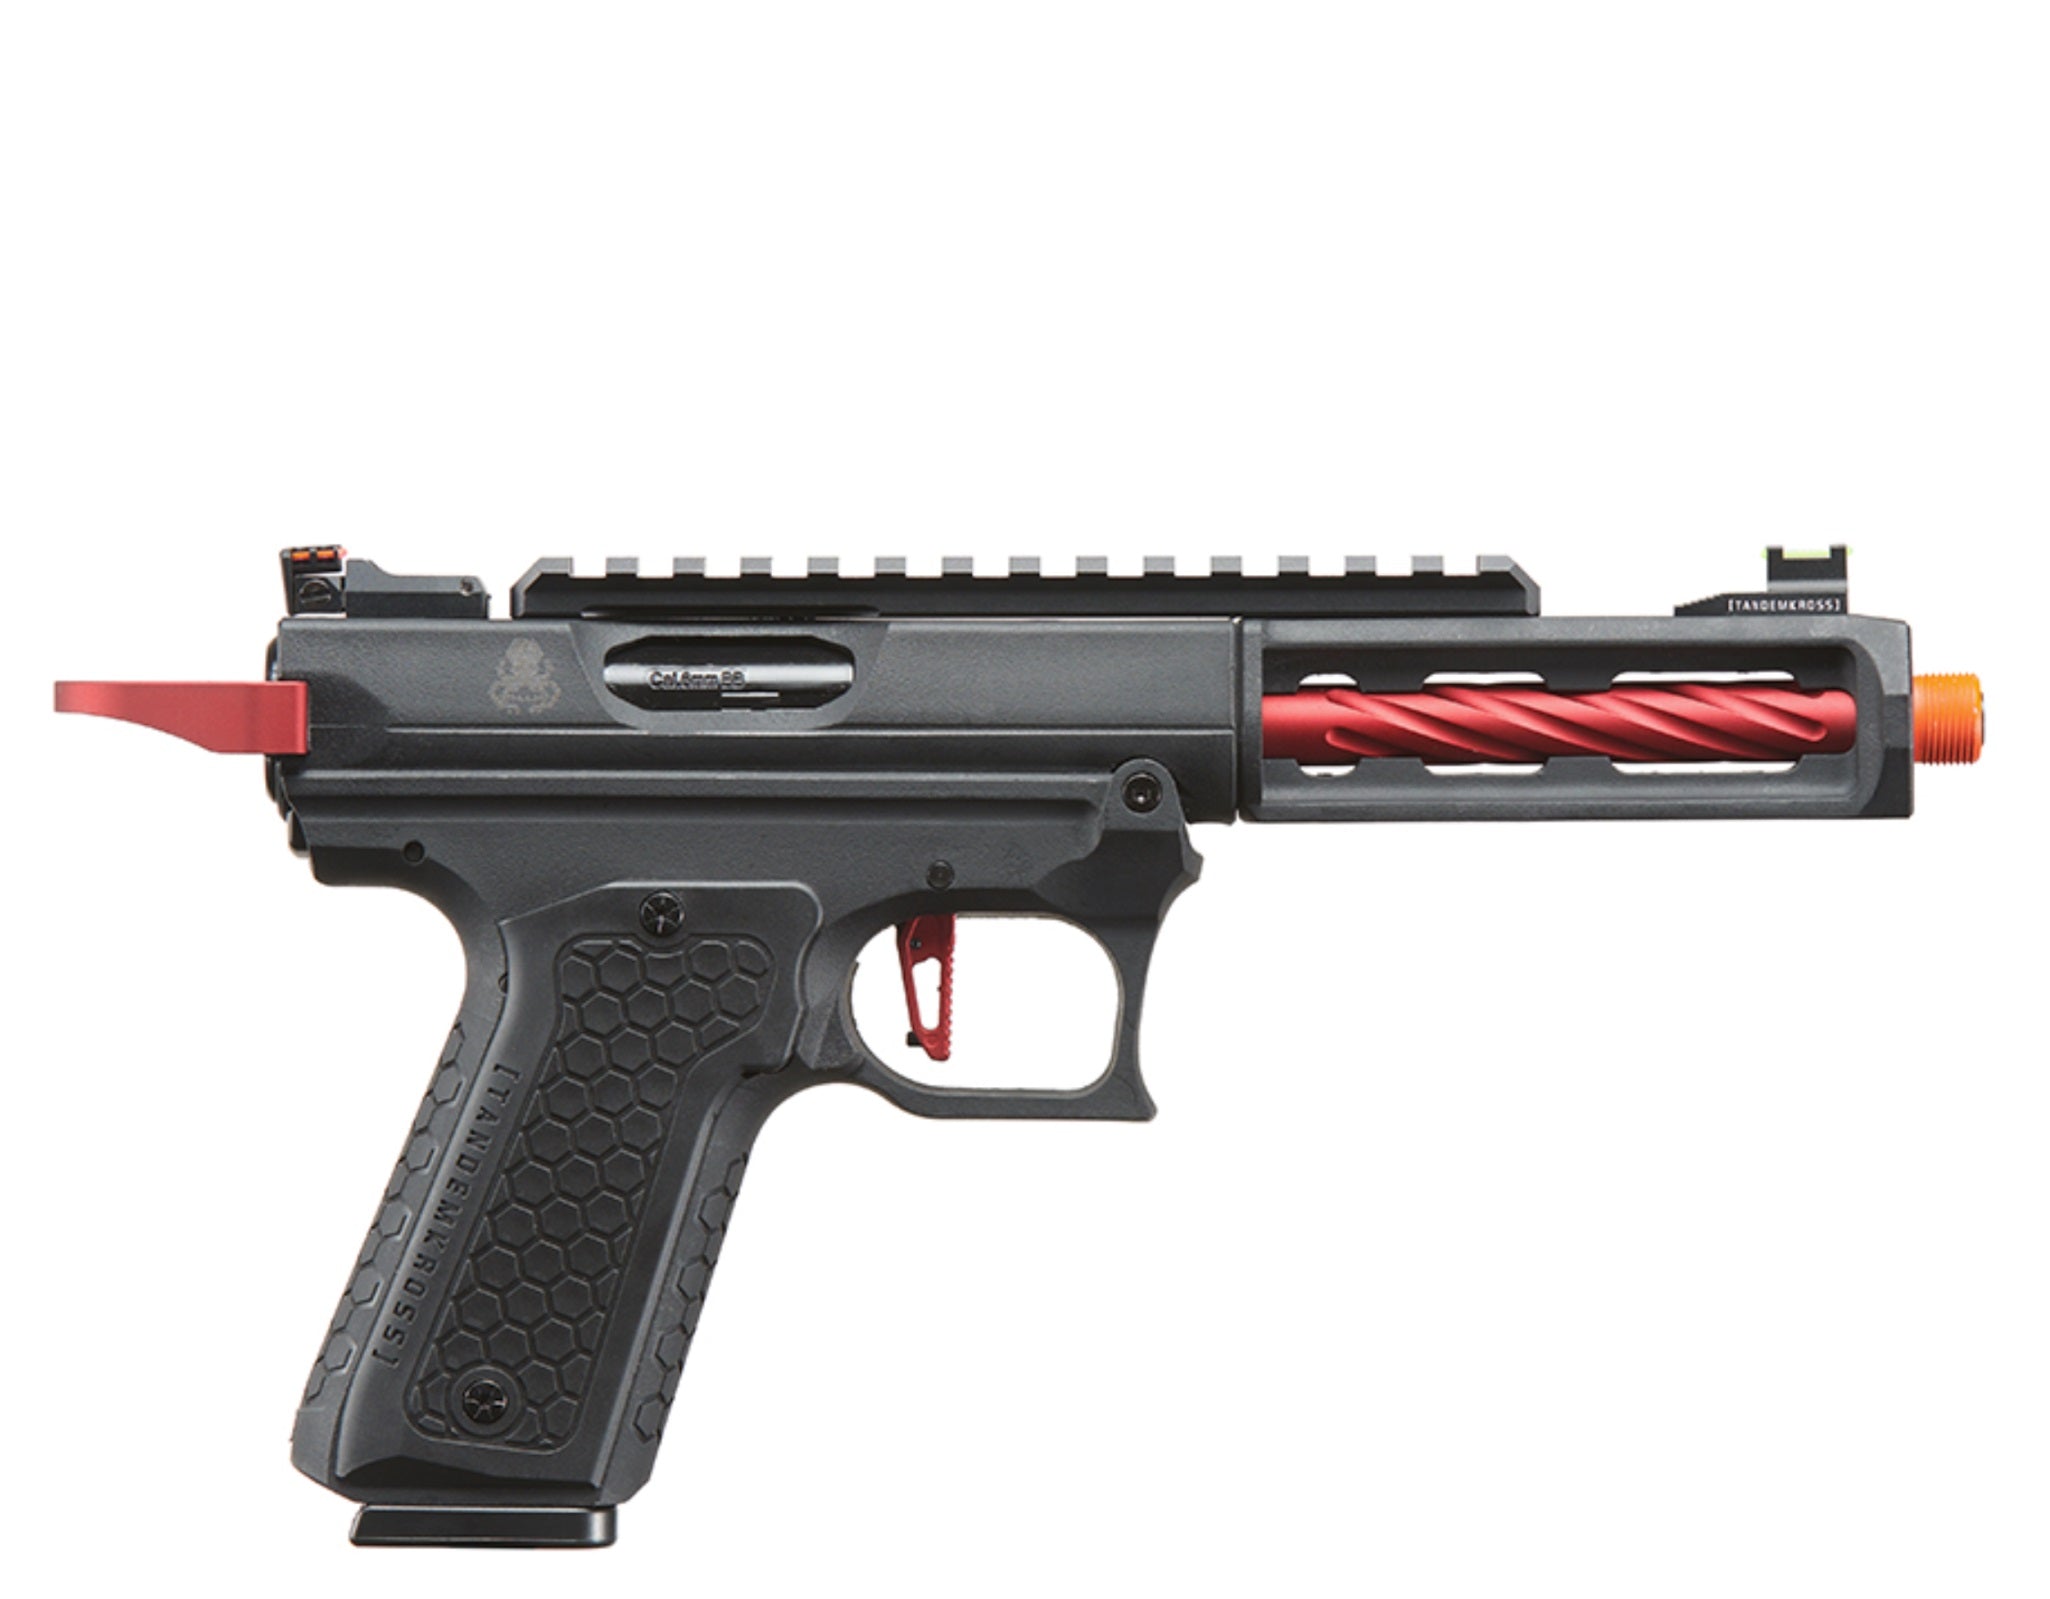 Tandemkross Officially Licensed CTHULHU GBB Airsoft Pisto